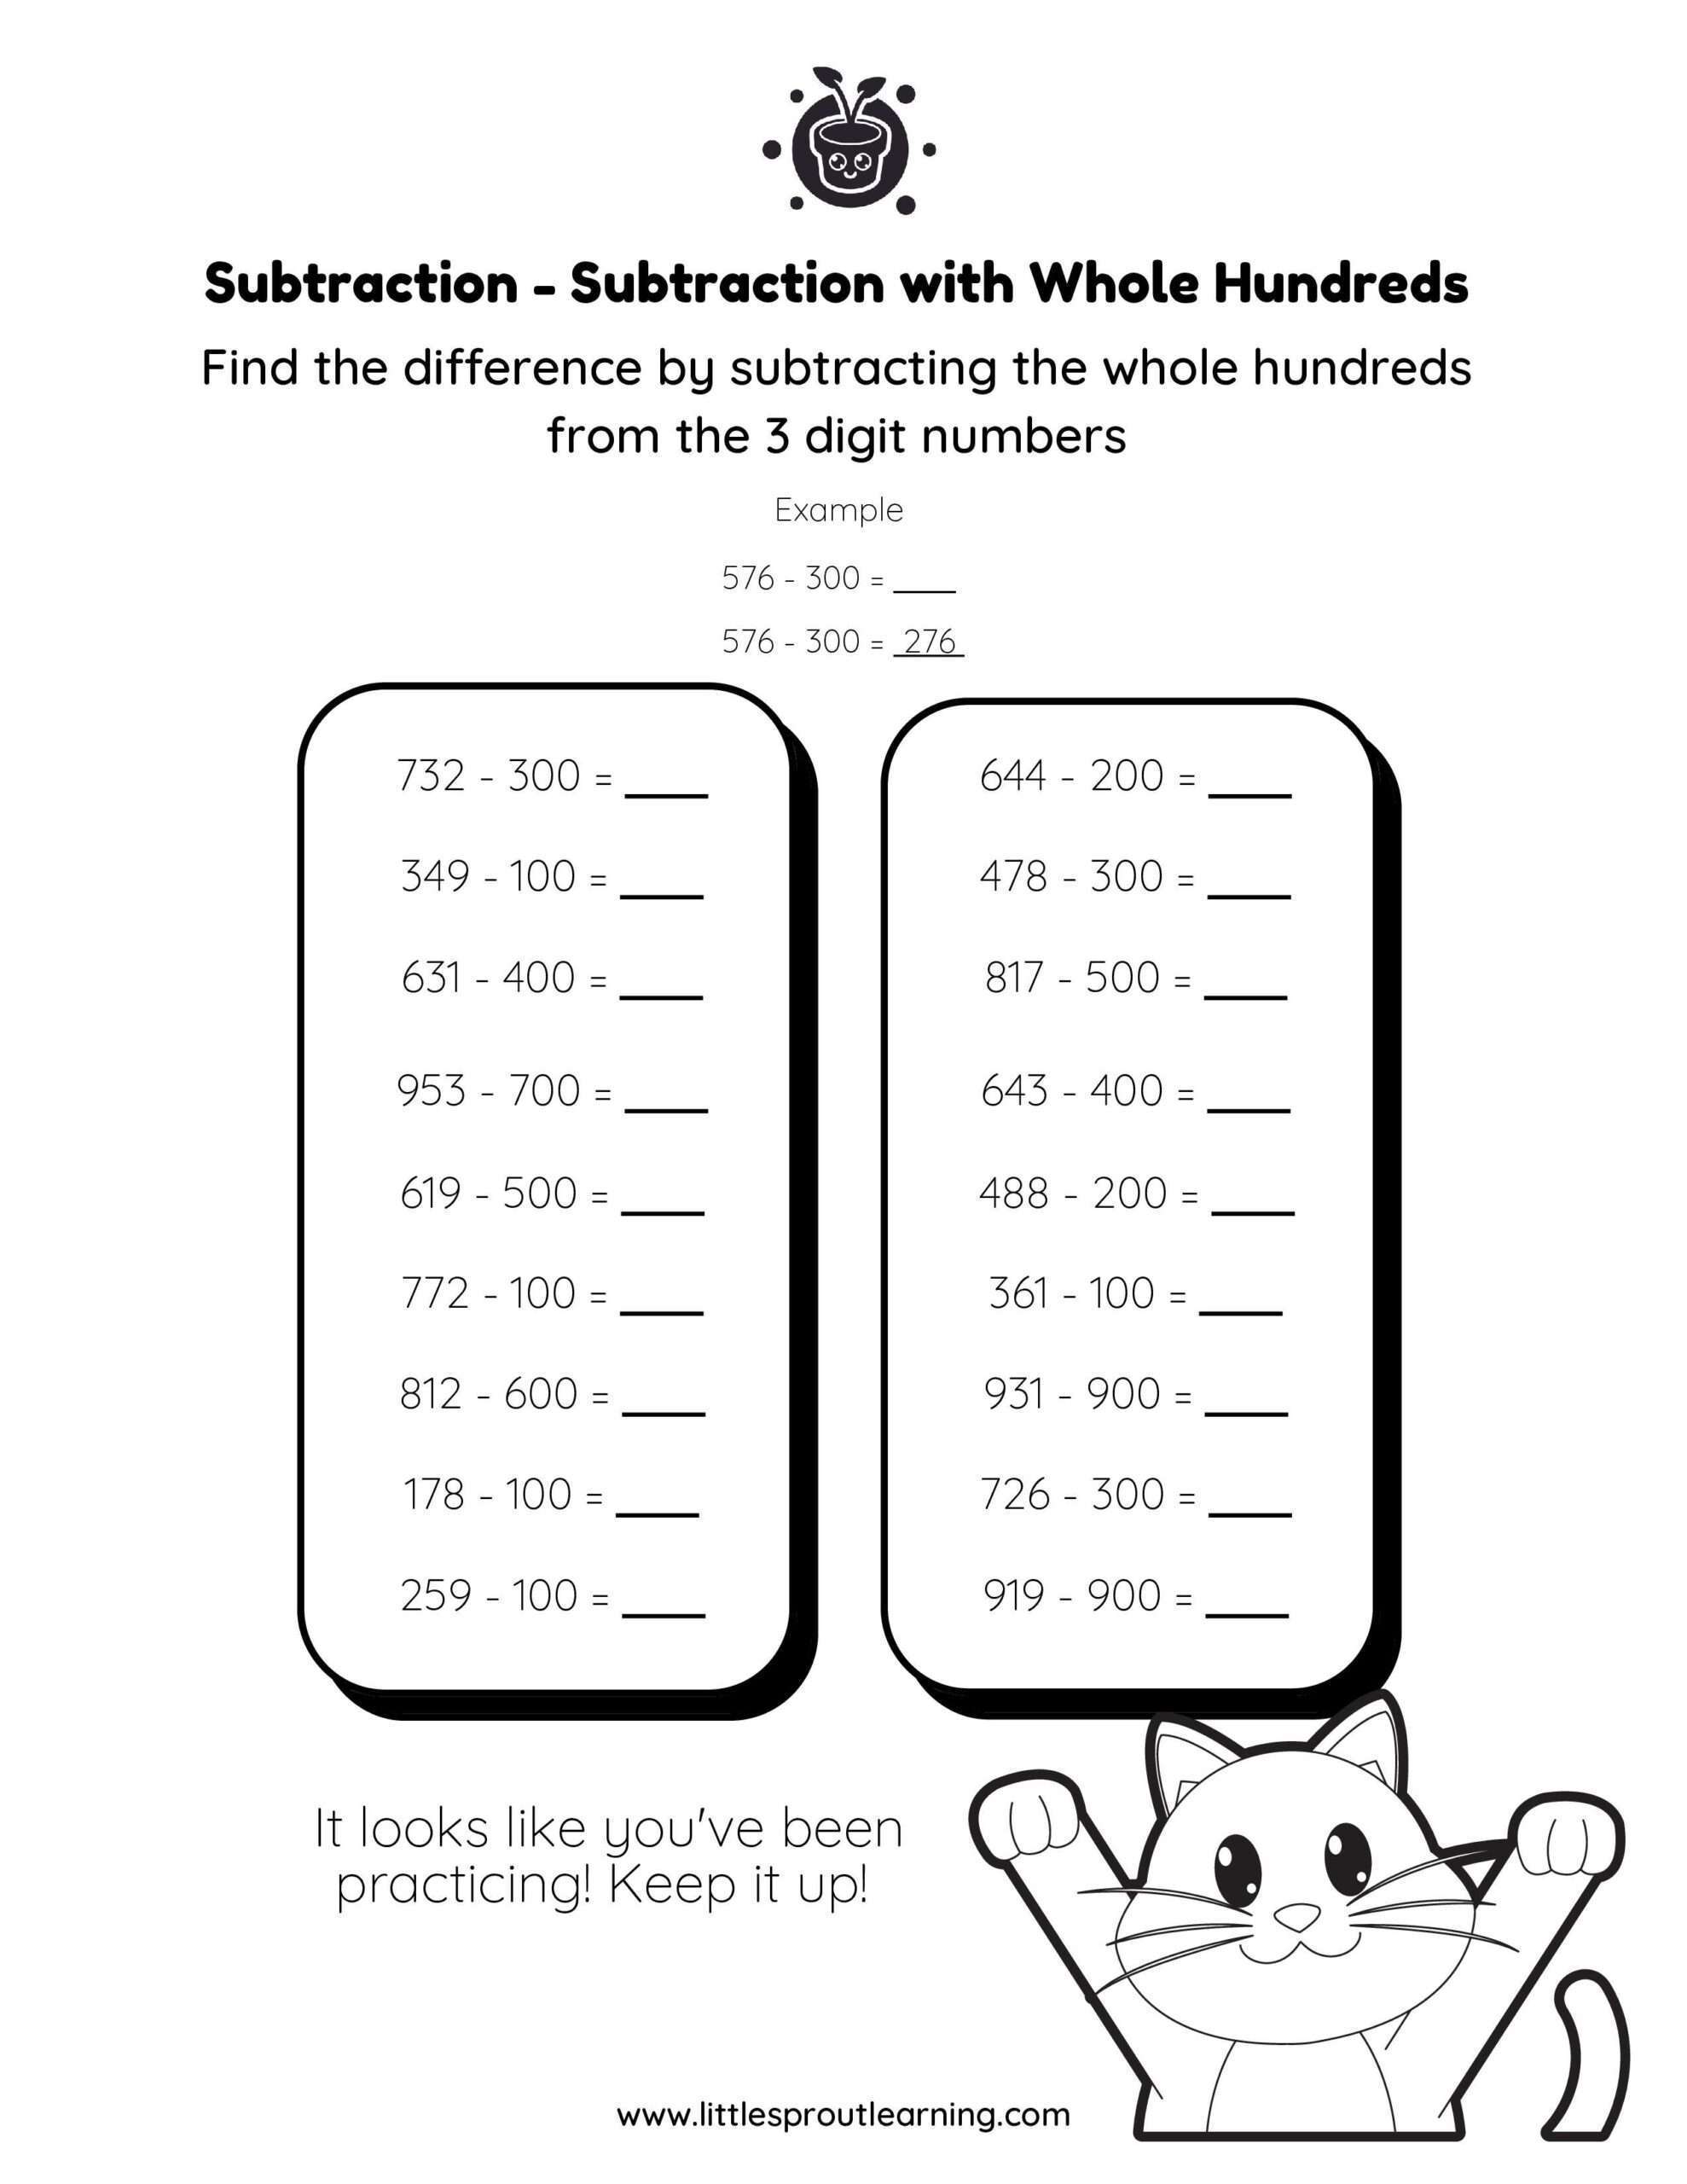 Subtraction with Whole hundreds from 3 Digit Numbers (With Regrouping)